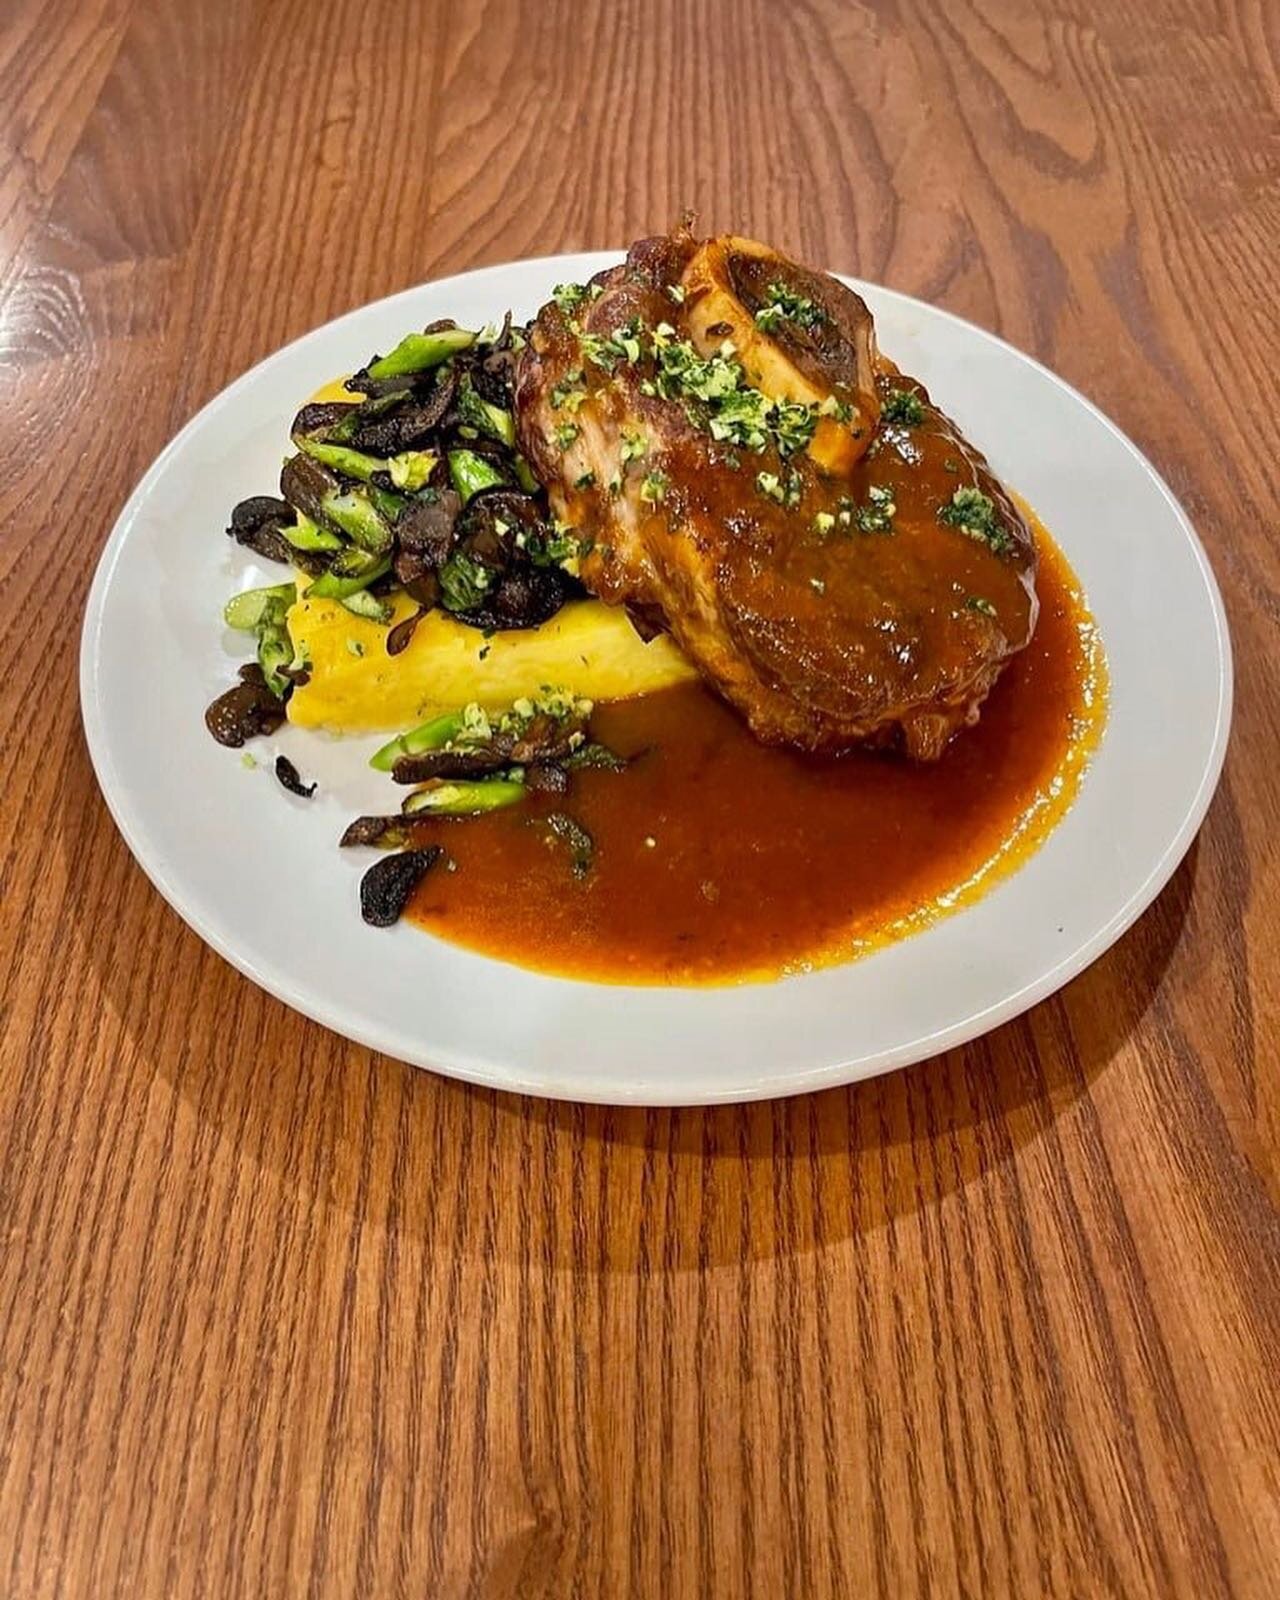 Our featured dish tonight is one of our all-time favorites!

𝐈𝐭𝐚𝐥𝐢𝐚𝐧 𝐎𝐬𝐬𝐨 𝐁𝐮𝐜𝐨 
Cross-cut veal shank, slow-roasted in a Chianti jus with saut&eacute;ed asparagus, mushrooms-served over polenta. It is fall-off-the-bone tender.

𝐑𝐞𝐬𝐞